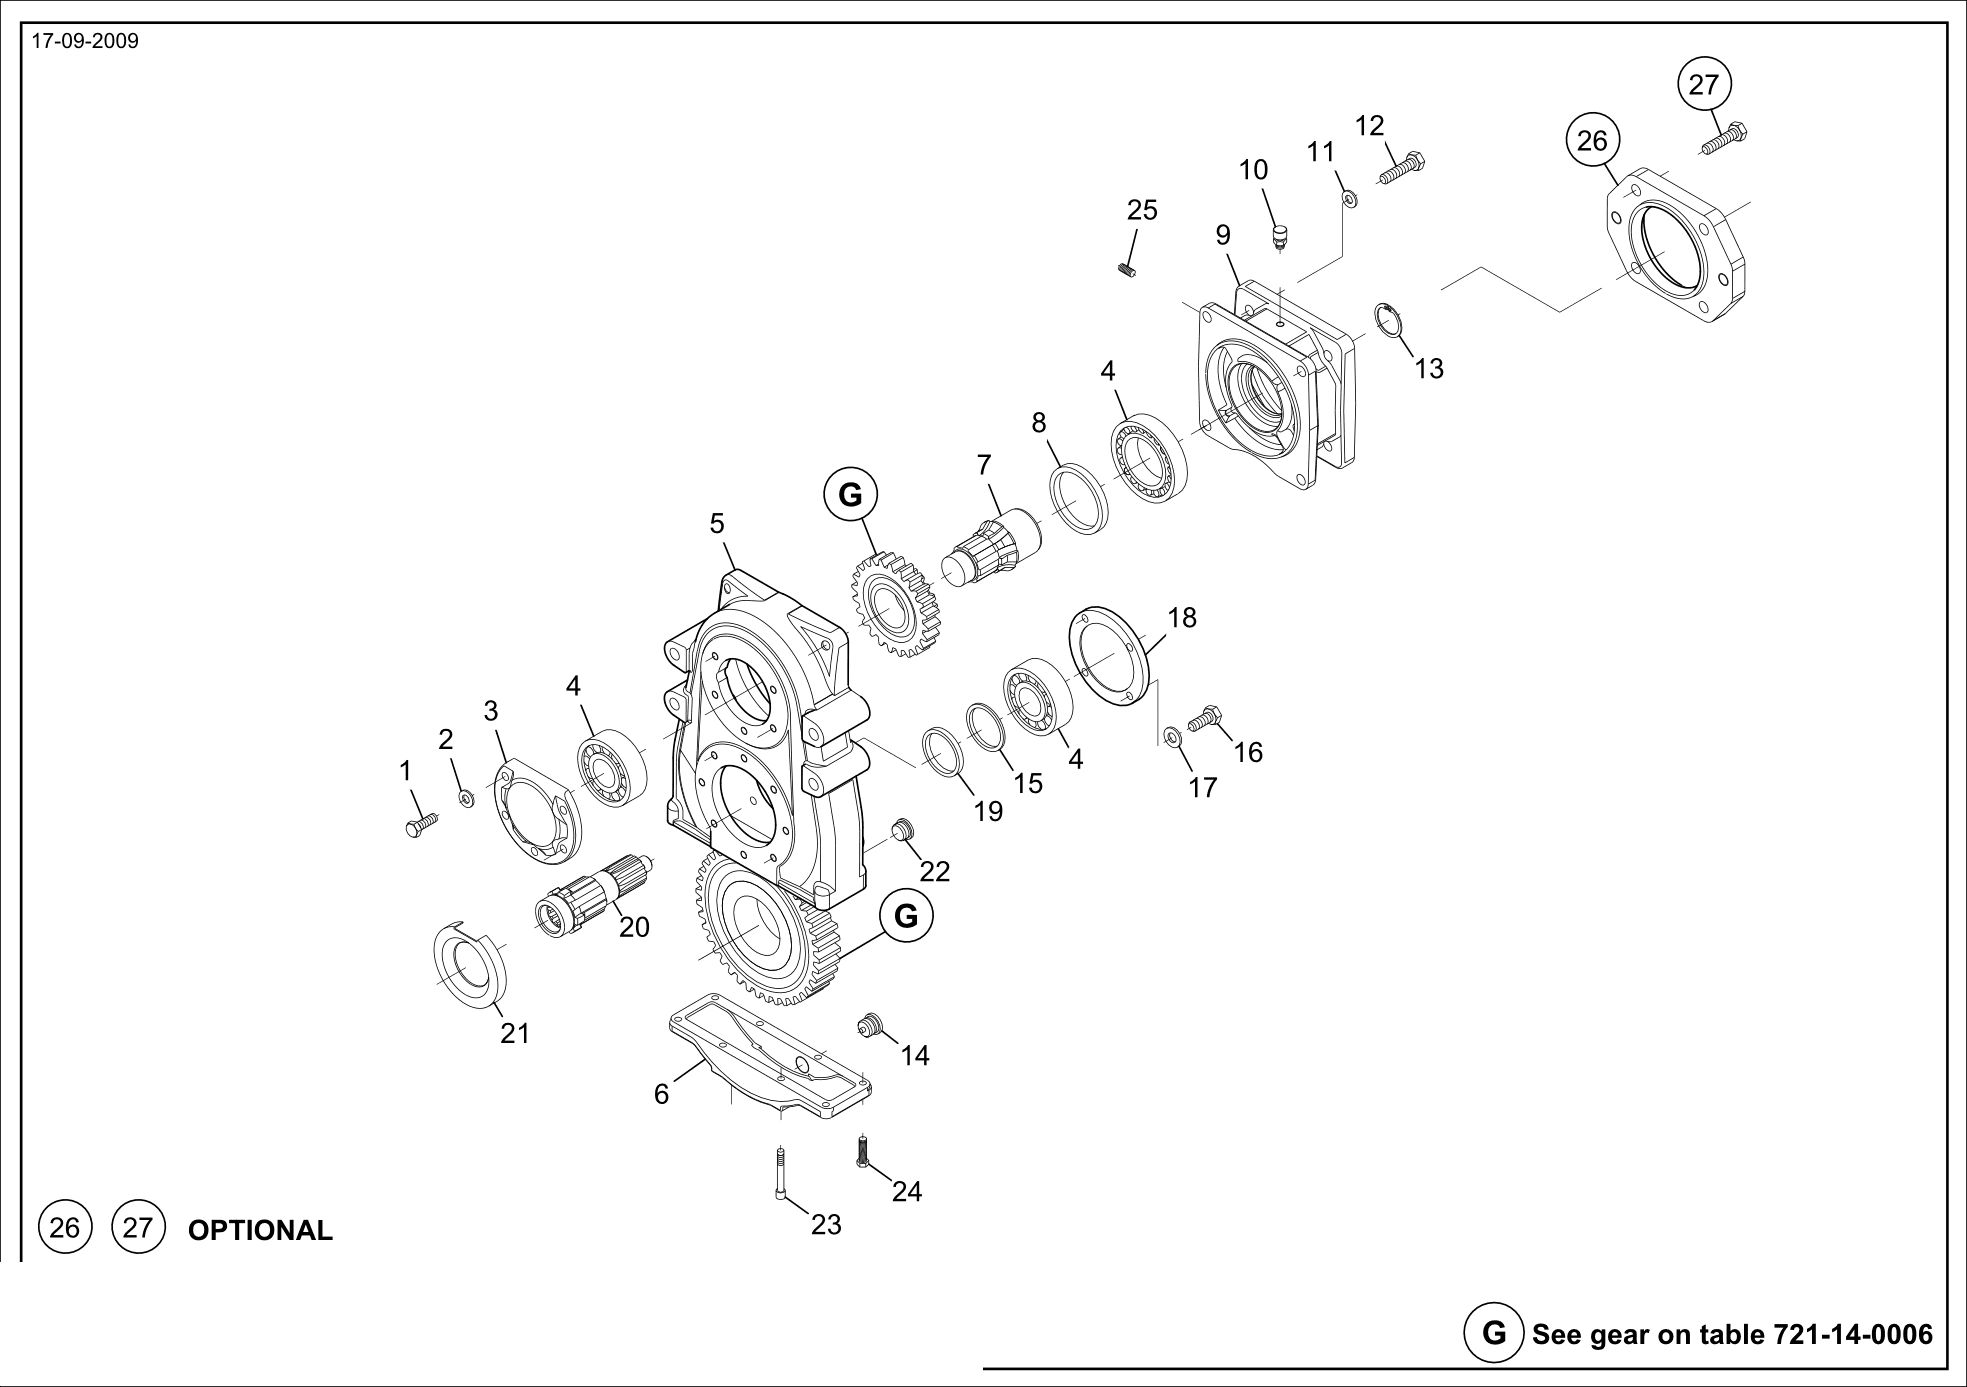 drawing for MECALAC 565A0016 - HOUSING (figure 1)